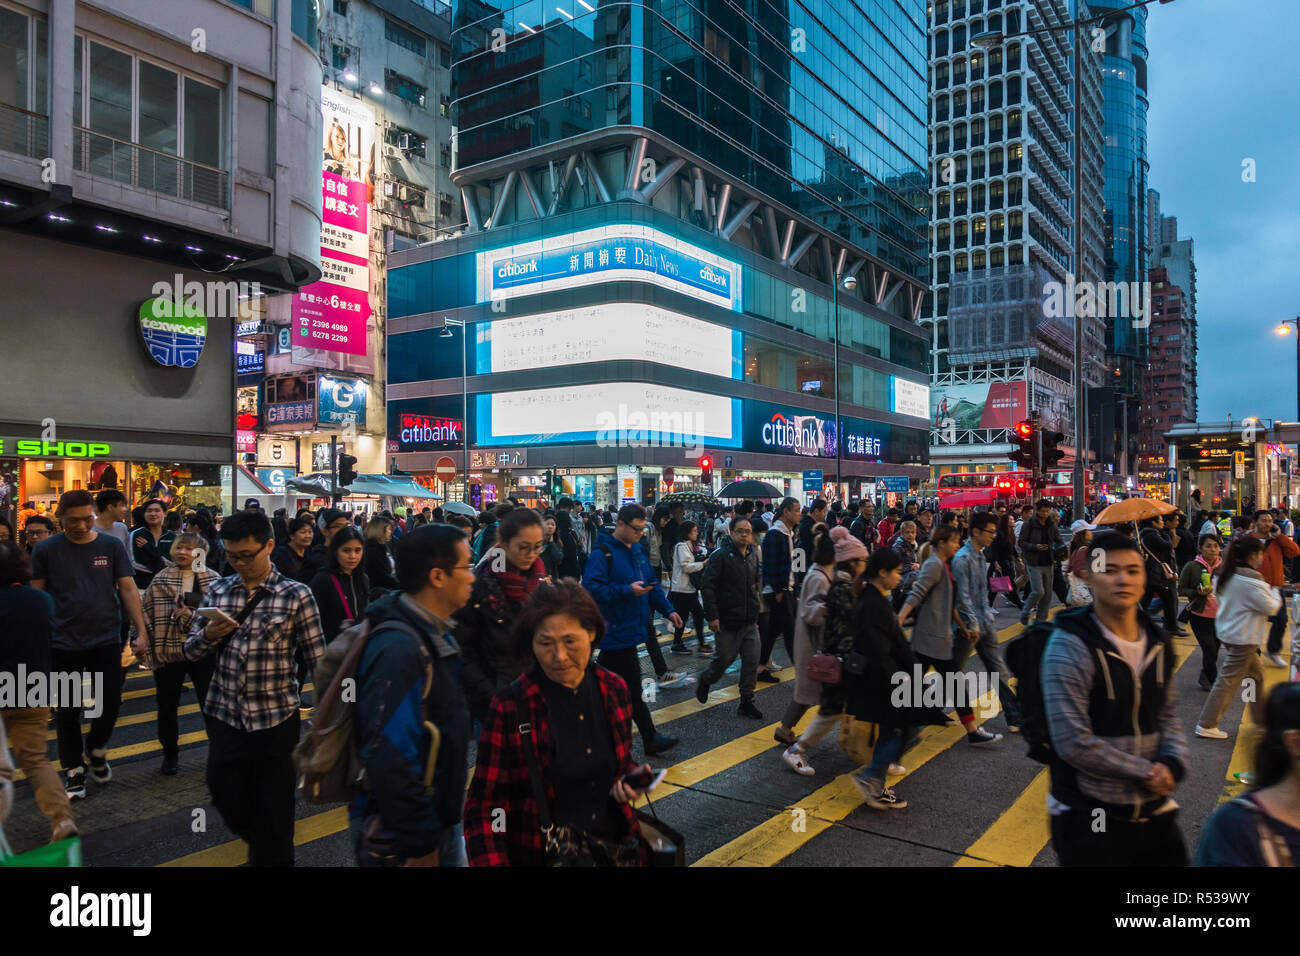 People crossing Nathan Road in Mong Kok, one of most densely populated areas in the world. Hong Kong, Kowloon, January 2018 Stock Photo